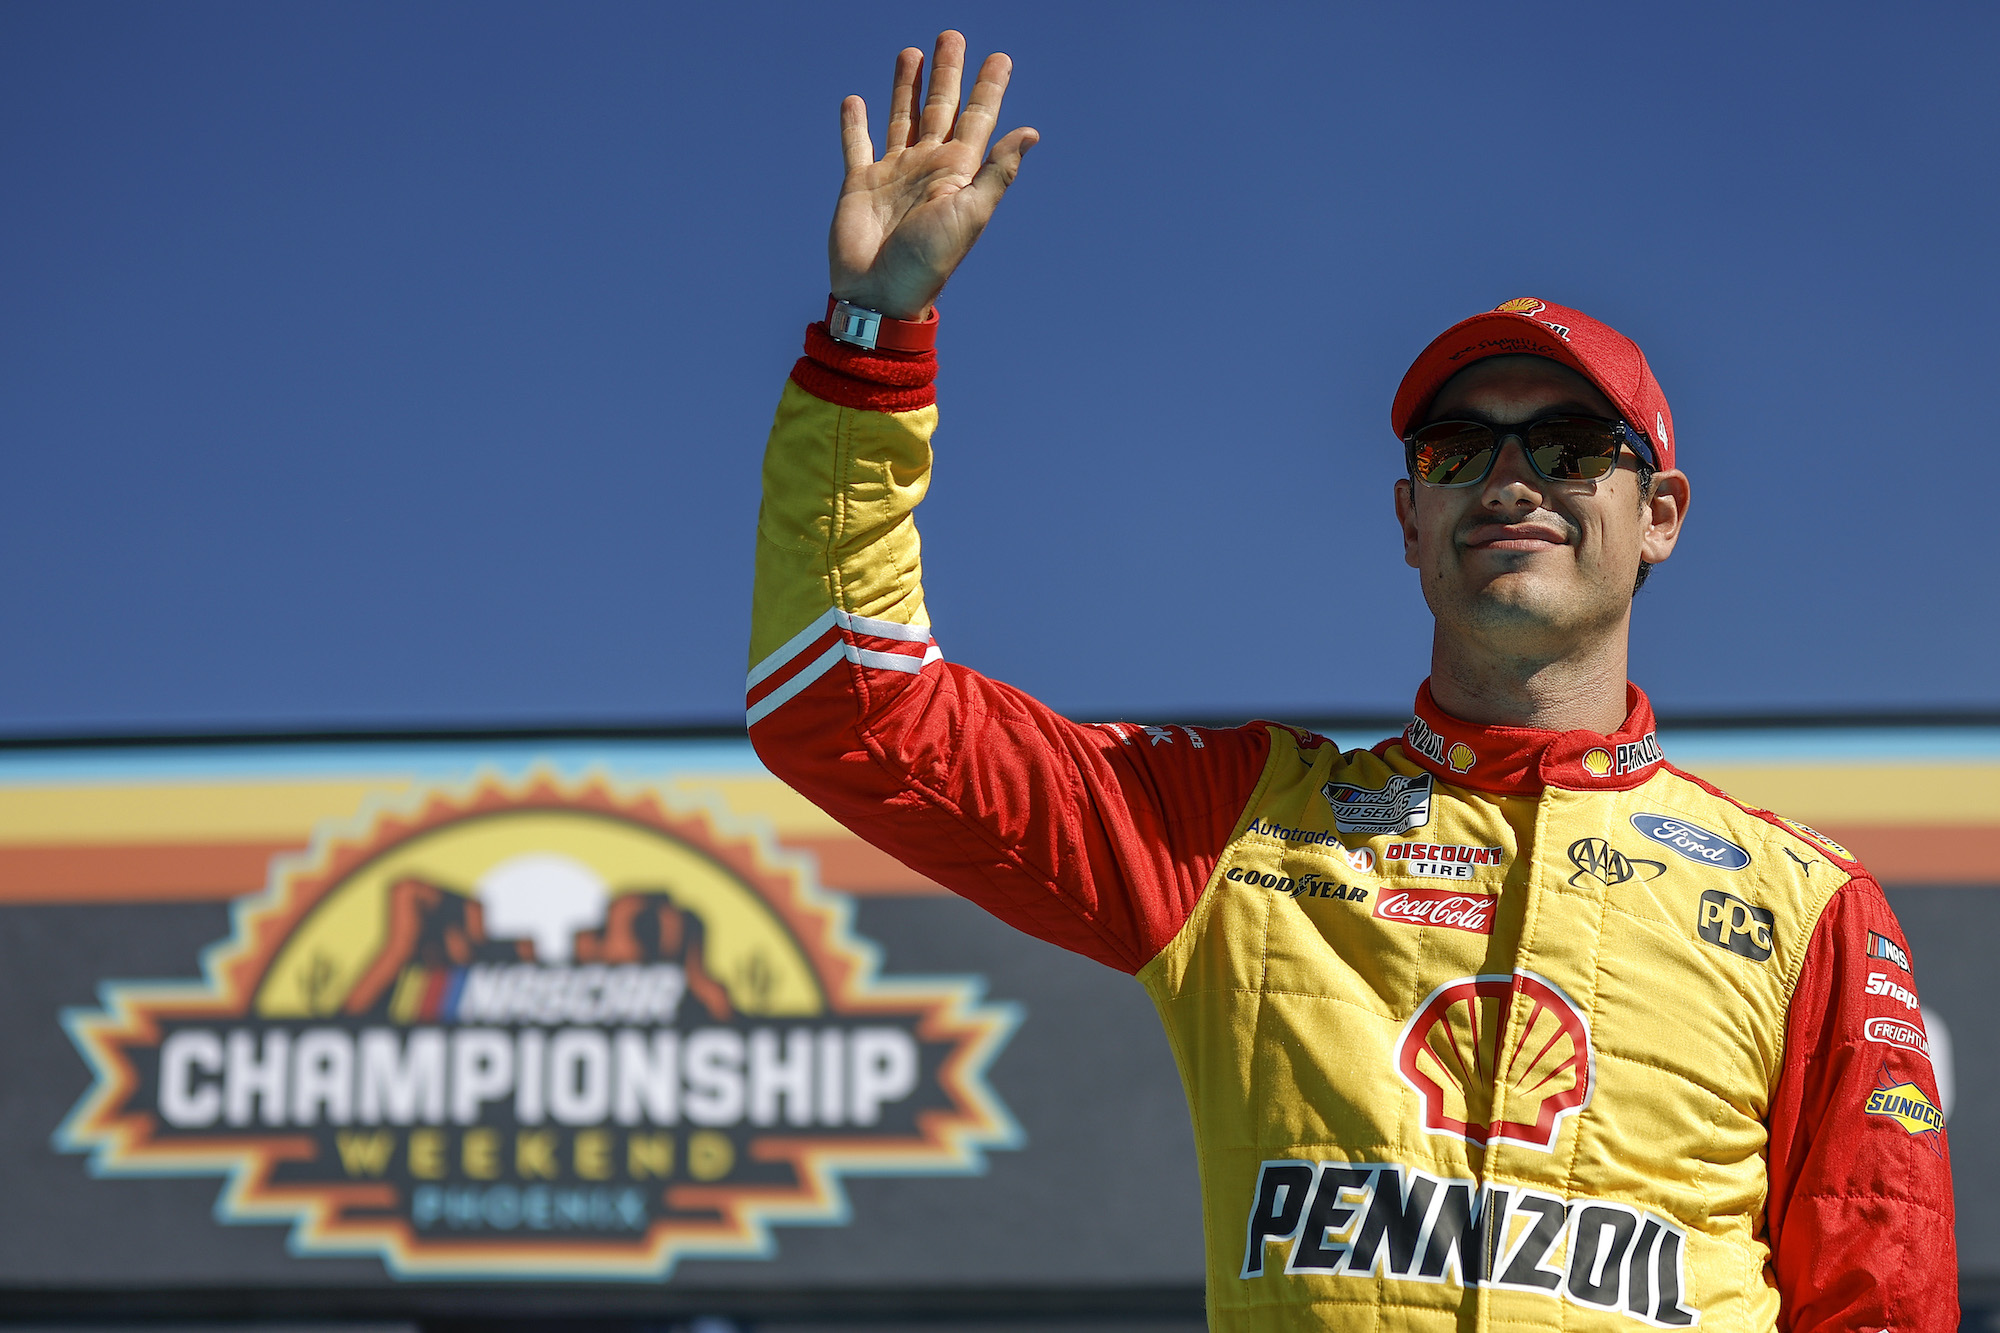 Joey Logano waves to fans